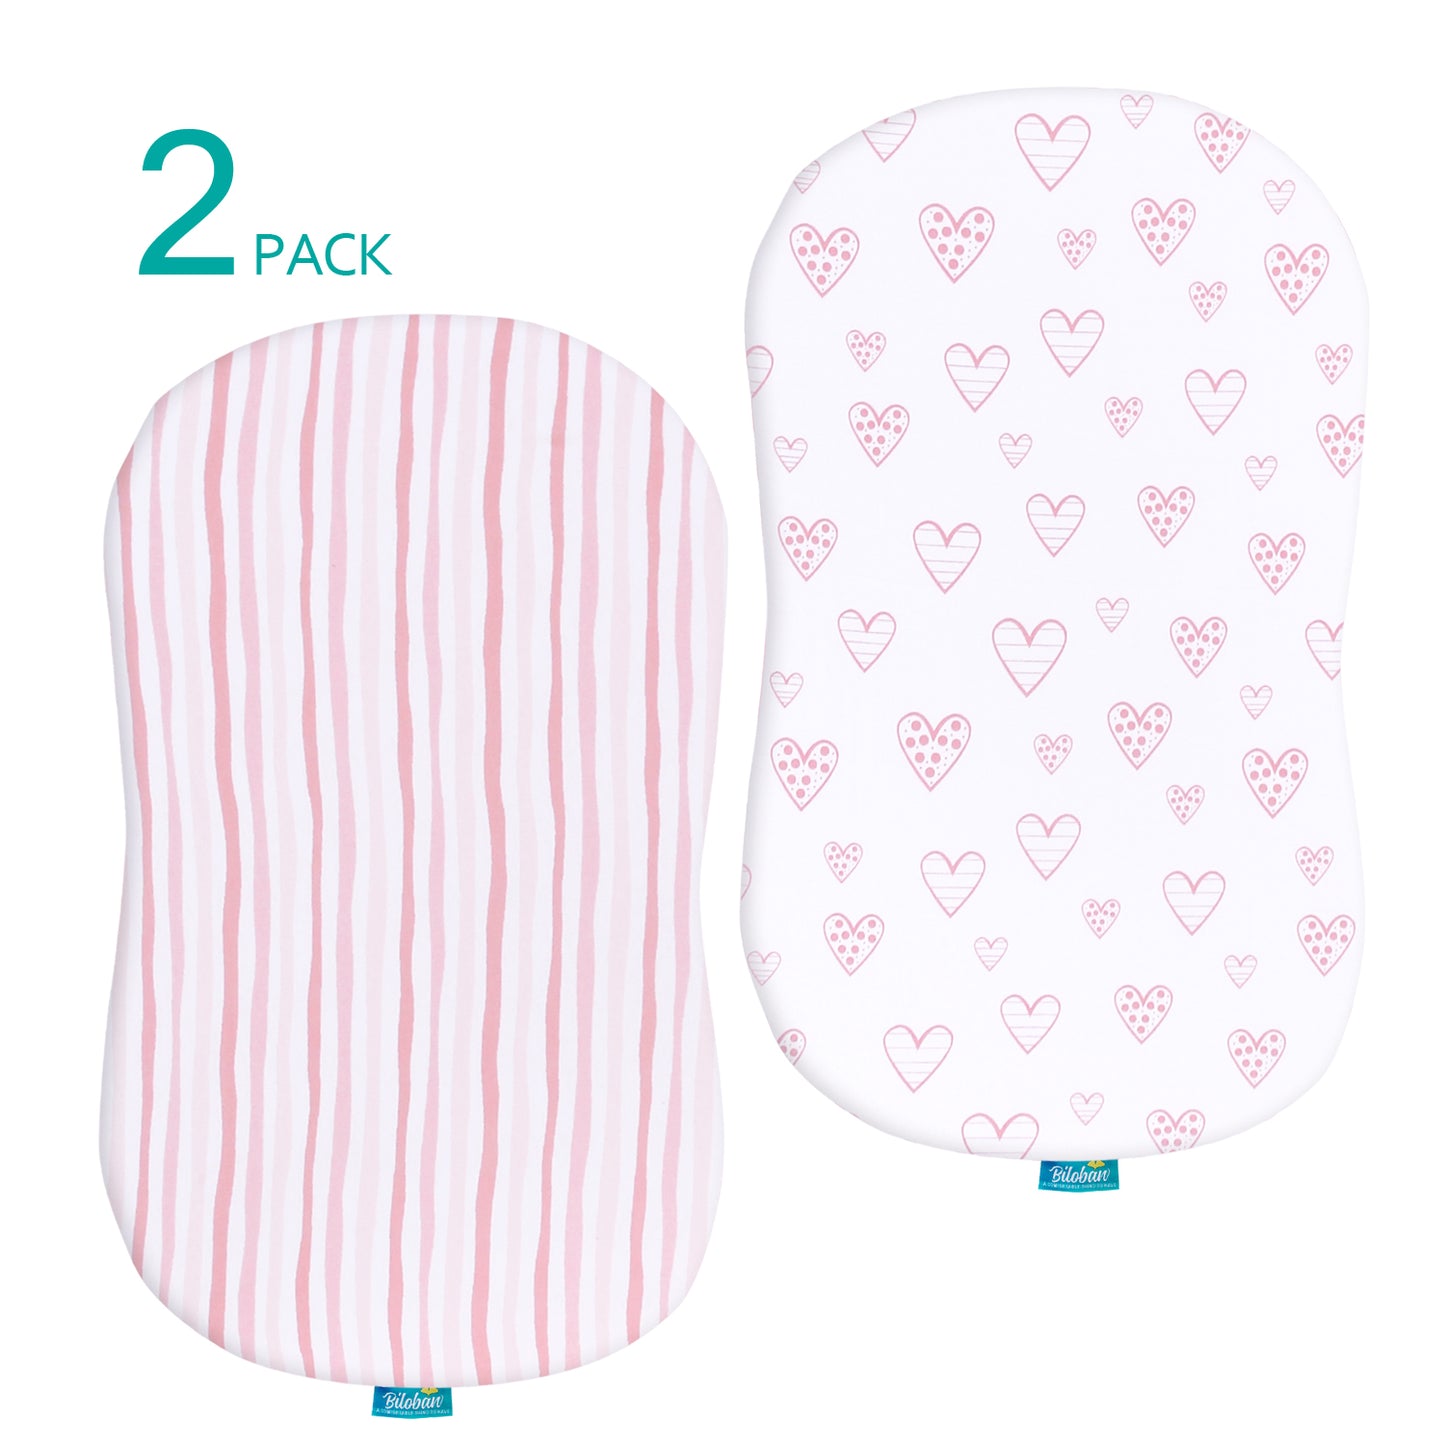 Customized / Personalized Bassinet Sheets - 2 Pack Cotton - Biloban Online Store